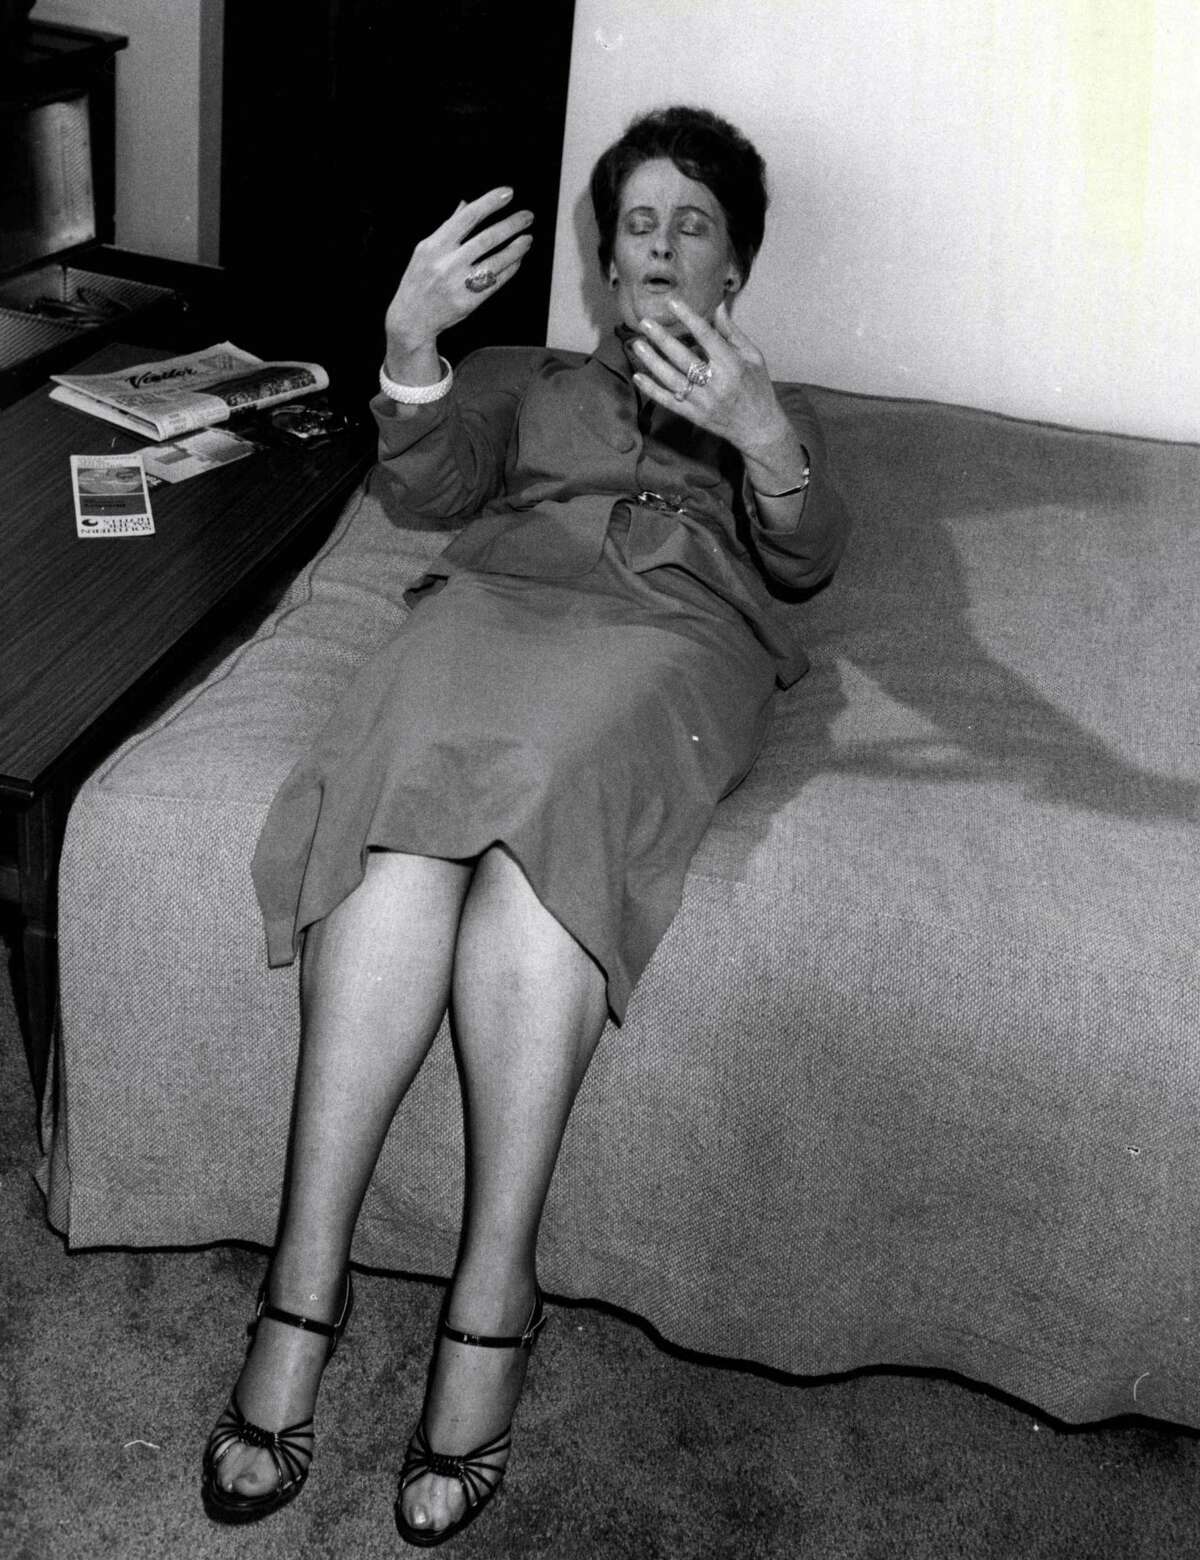 American ghost hunter, Mrs. Lorraine Warren shows how she lay back on a bed in the home of Mrs. Wendy Evans of Gladesville, and that she felt vibrations.